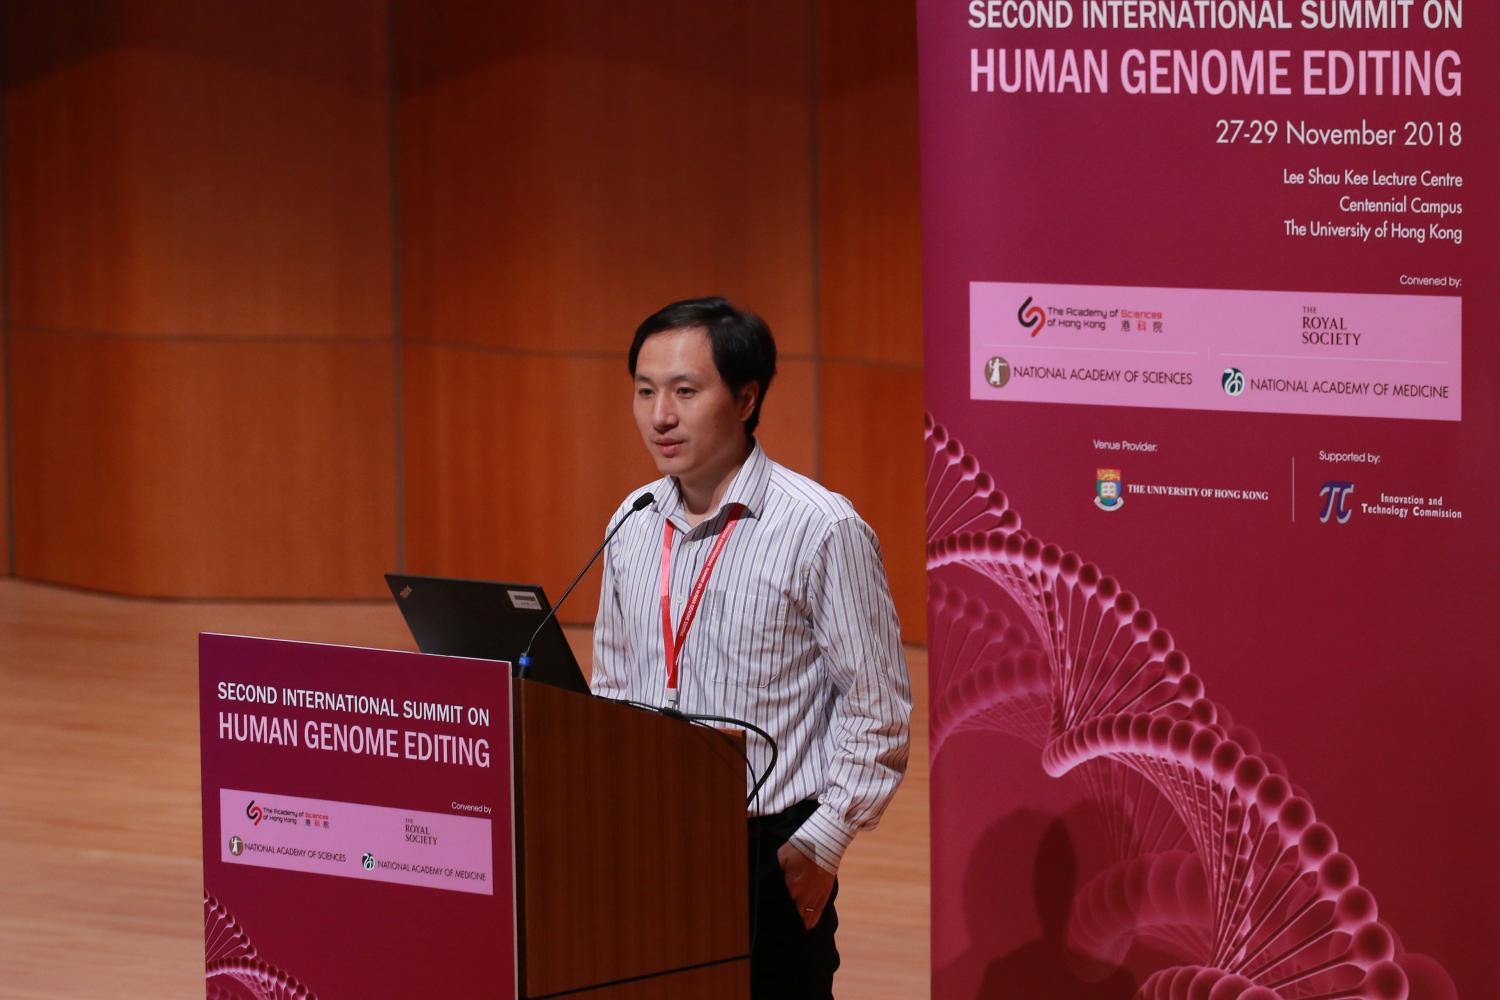 Scientist He Jiankui speaks during the International Summit on Human Genome Editing at the University of Hong Kong in Hong Kong, China November 28, 2018. REUTERS/Stringer  ATTENTION EDITORS - THIS IMAGE WAS PROVIDED BY A THIRD PARTY. CHINA OUT. - RC160E366BC0